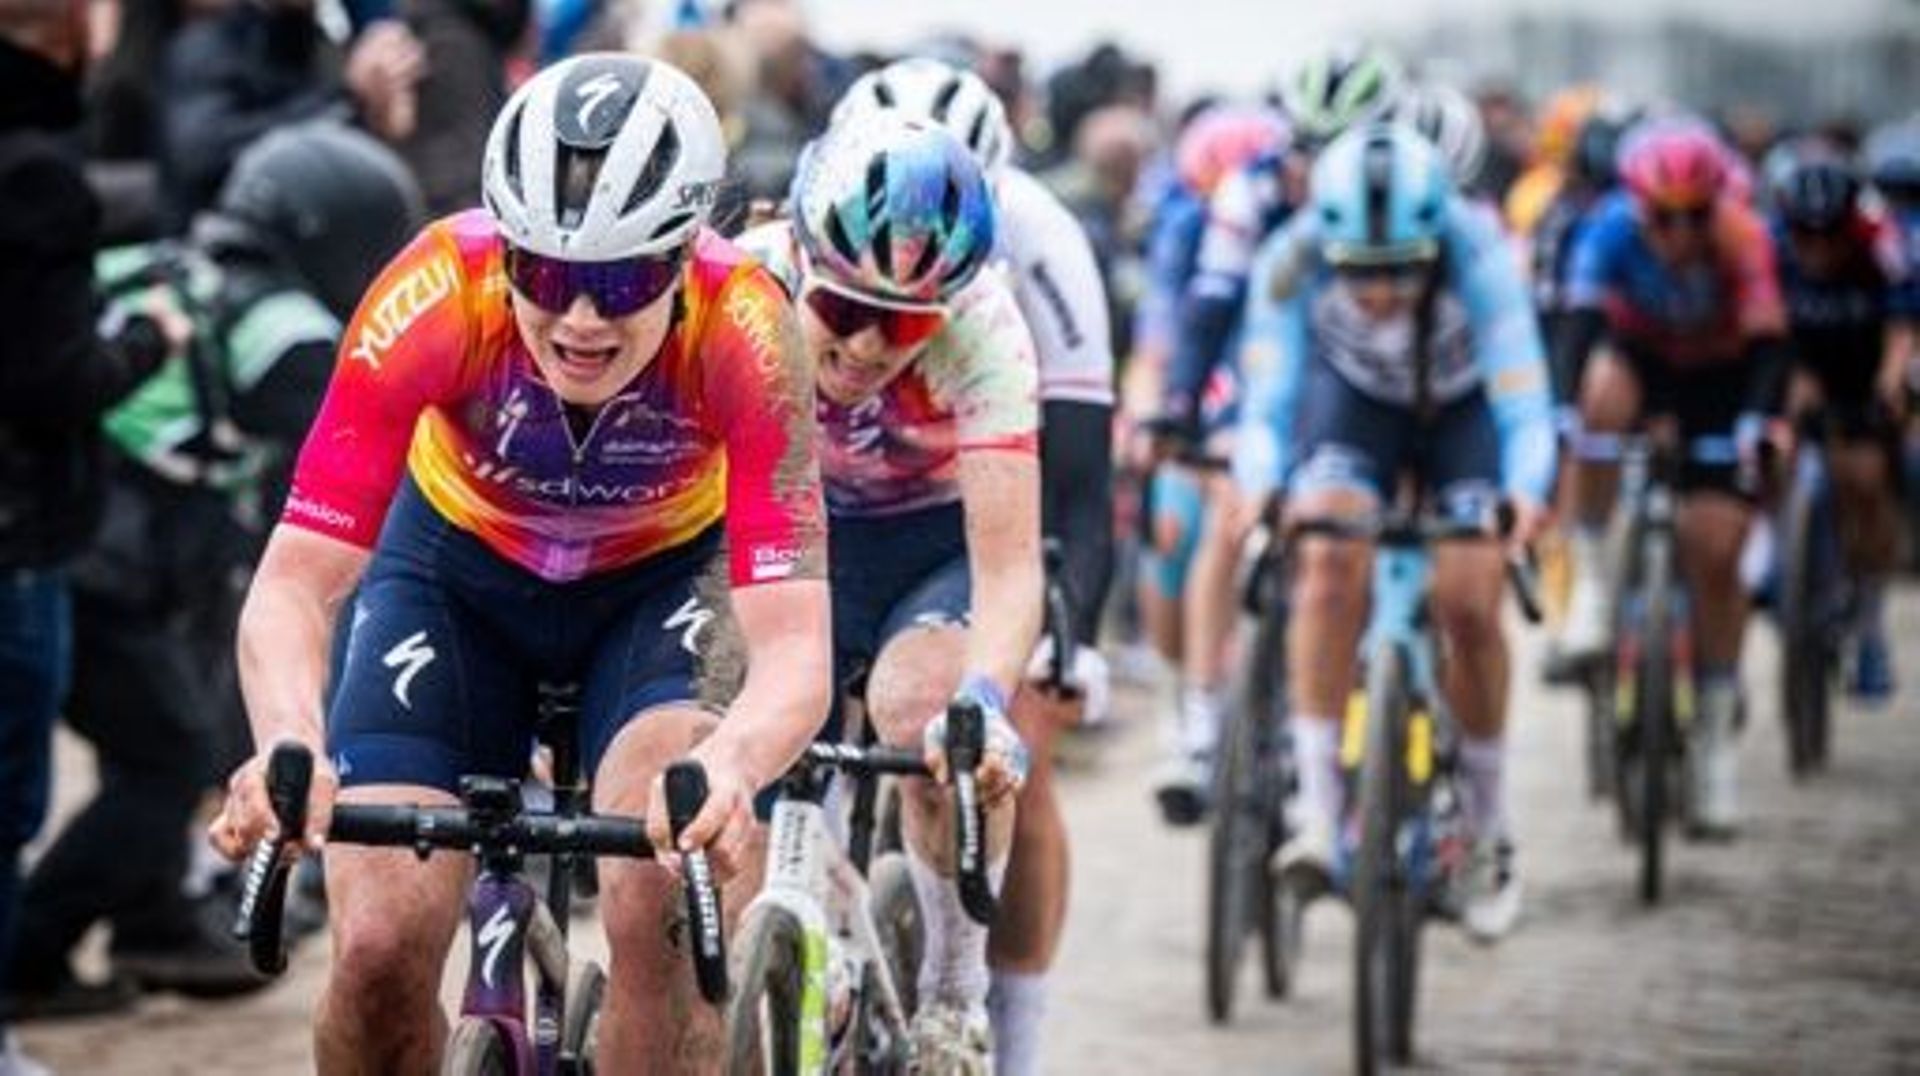 Belgian Lotte Kopecky of SD Worx pictured in action during the third edition of the women elite race of the 'Paris-Roubaix' cycling event, 145,4 km from Denain to Roubaix, France on Saturday 08 April 2023. BELGA PHOTO JASPER JACOBS